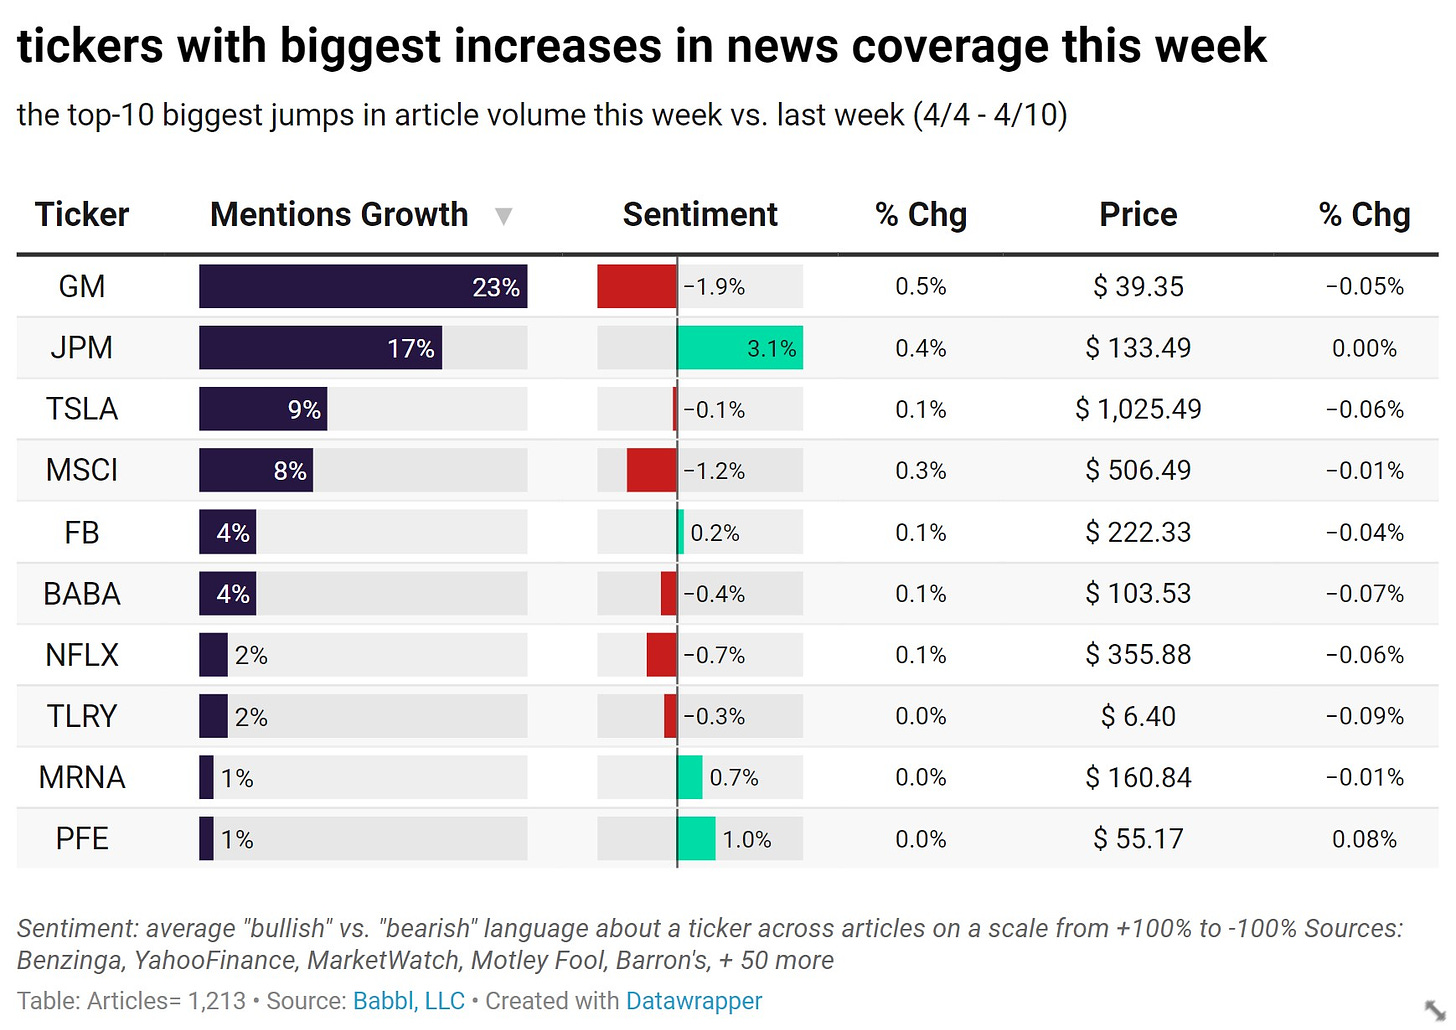 tickers with biggest increases in news sentiment this week (top 10)